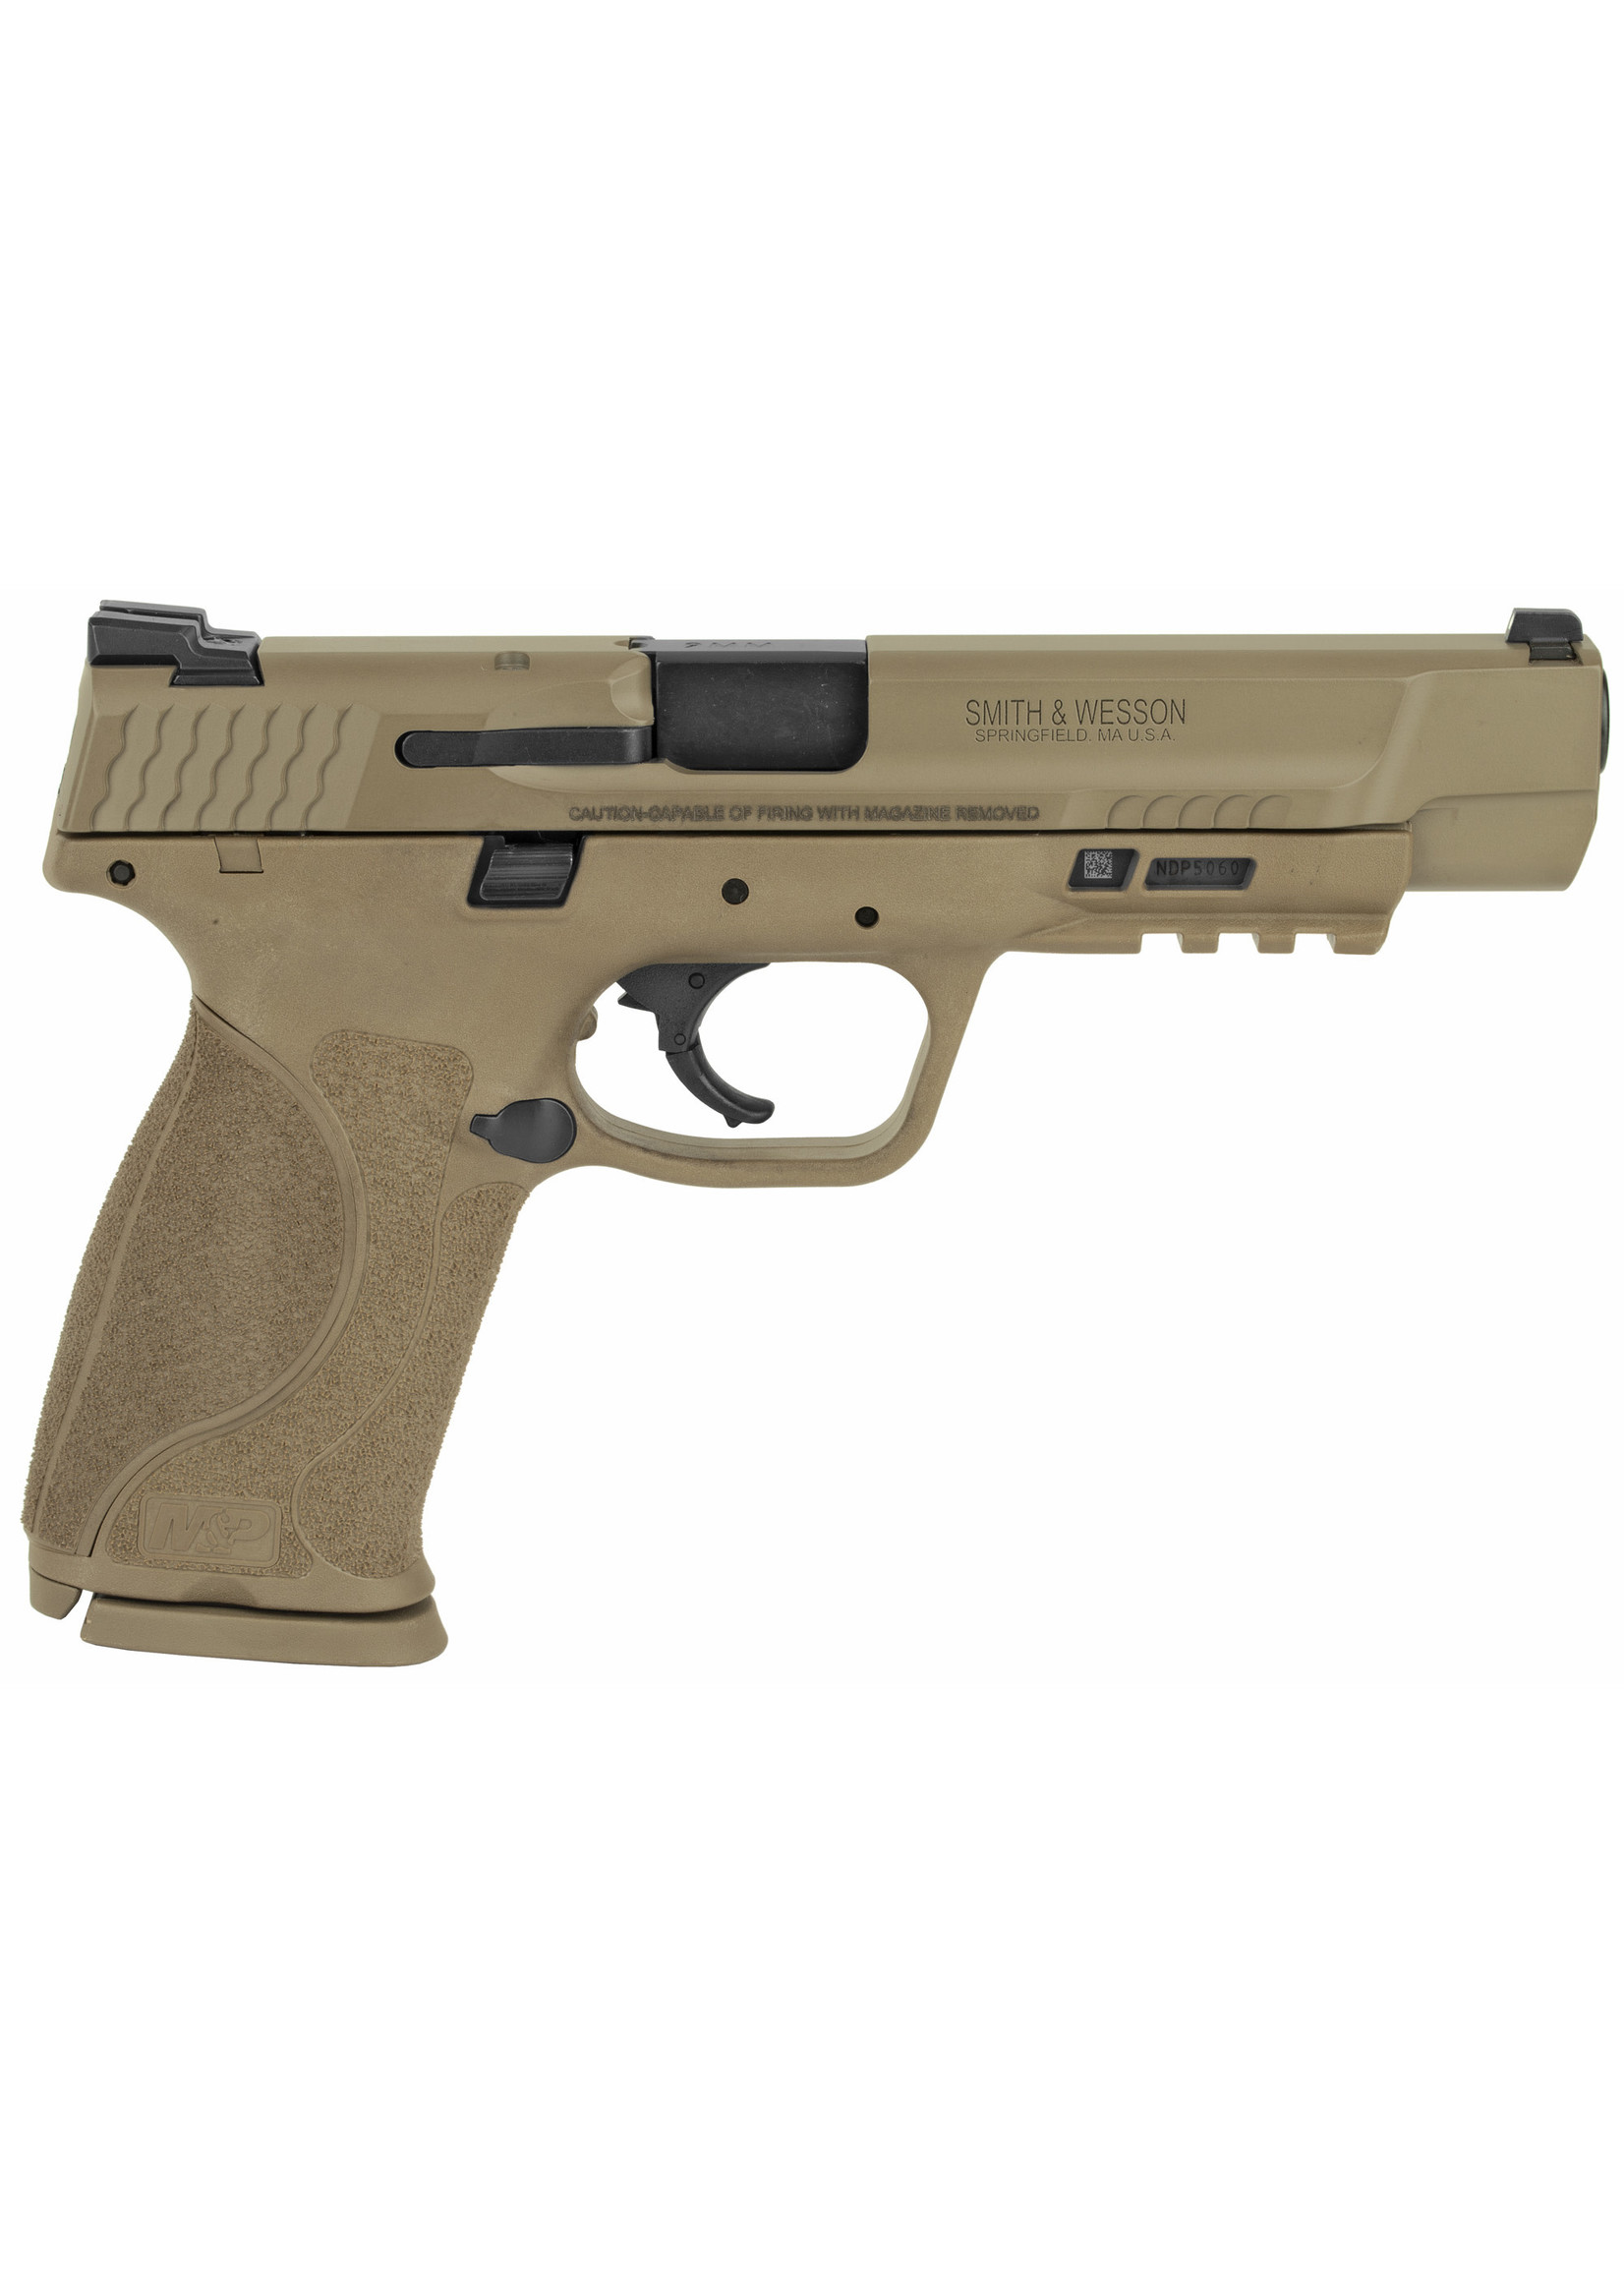 Smith and Wesson (S&W) Smith & Wesson M&P9 M2.0 Pistol 9 MM, FDE